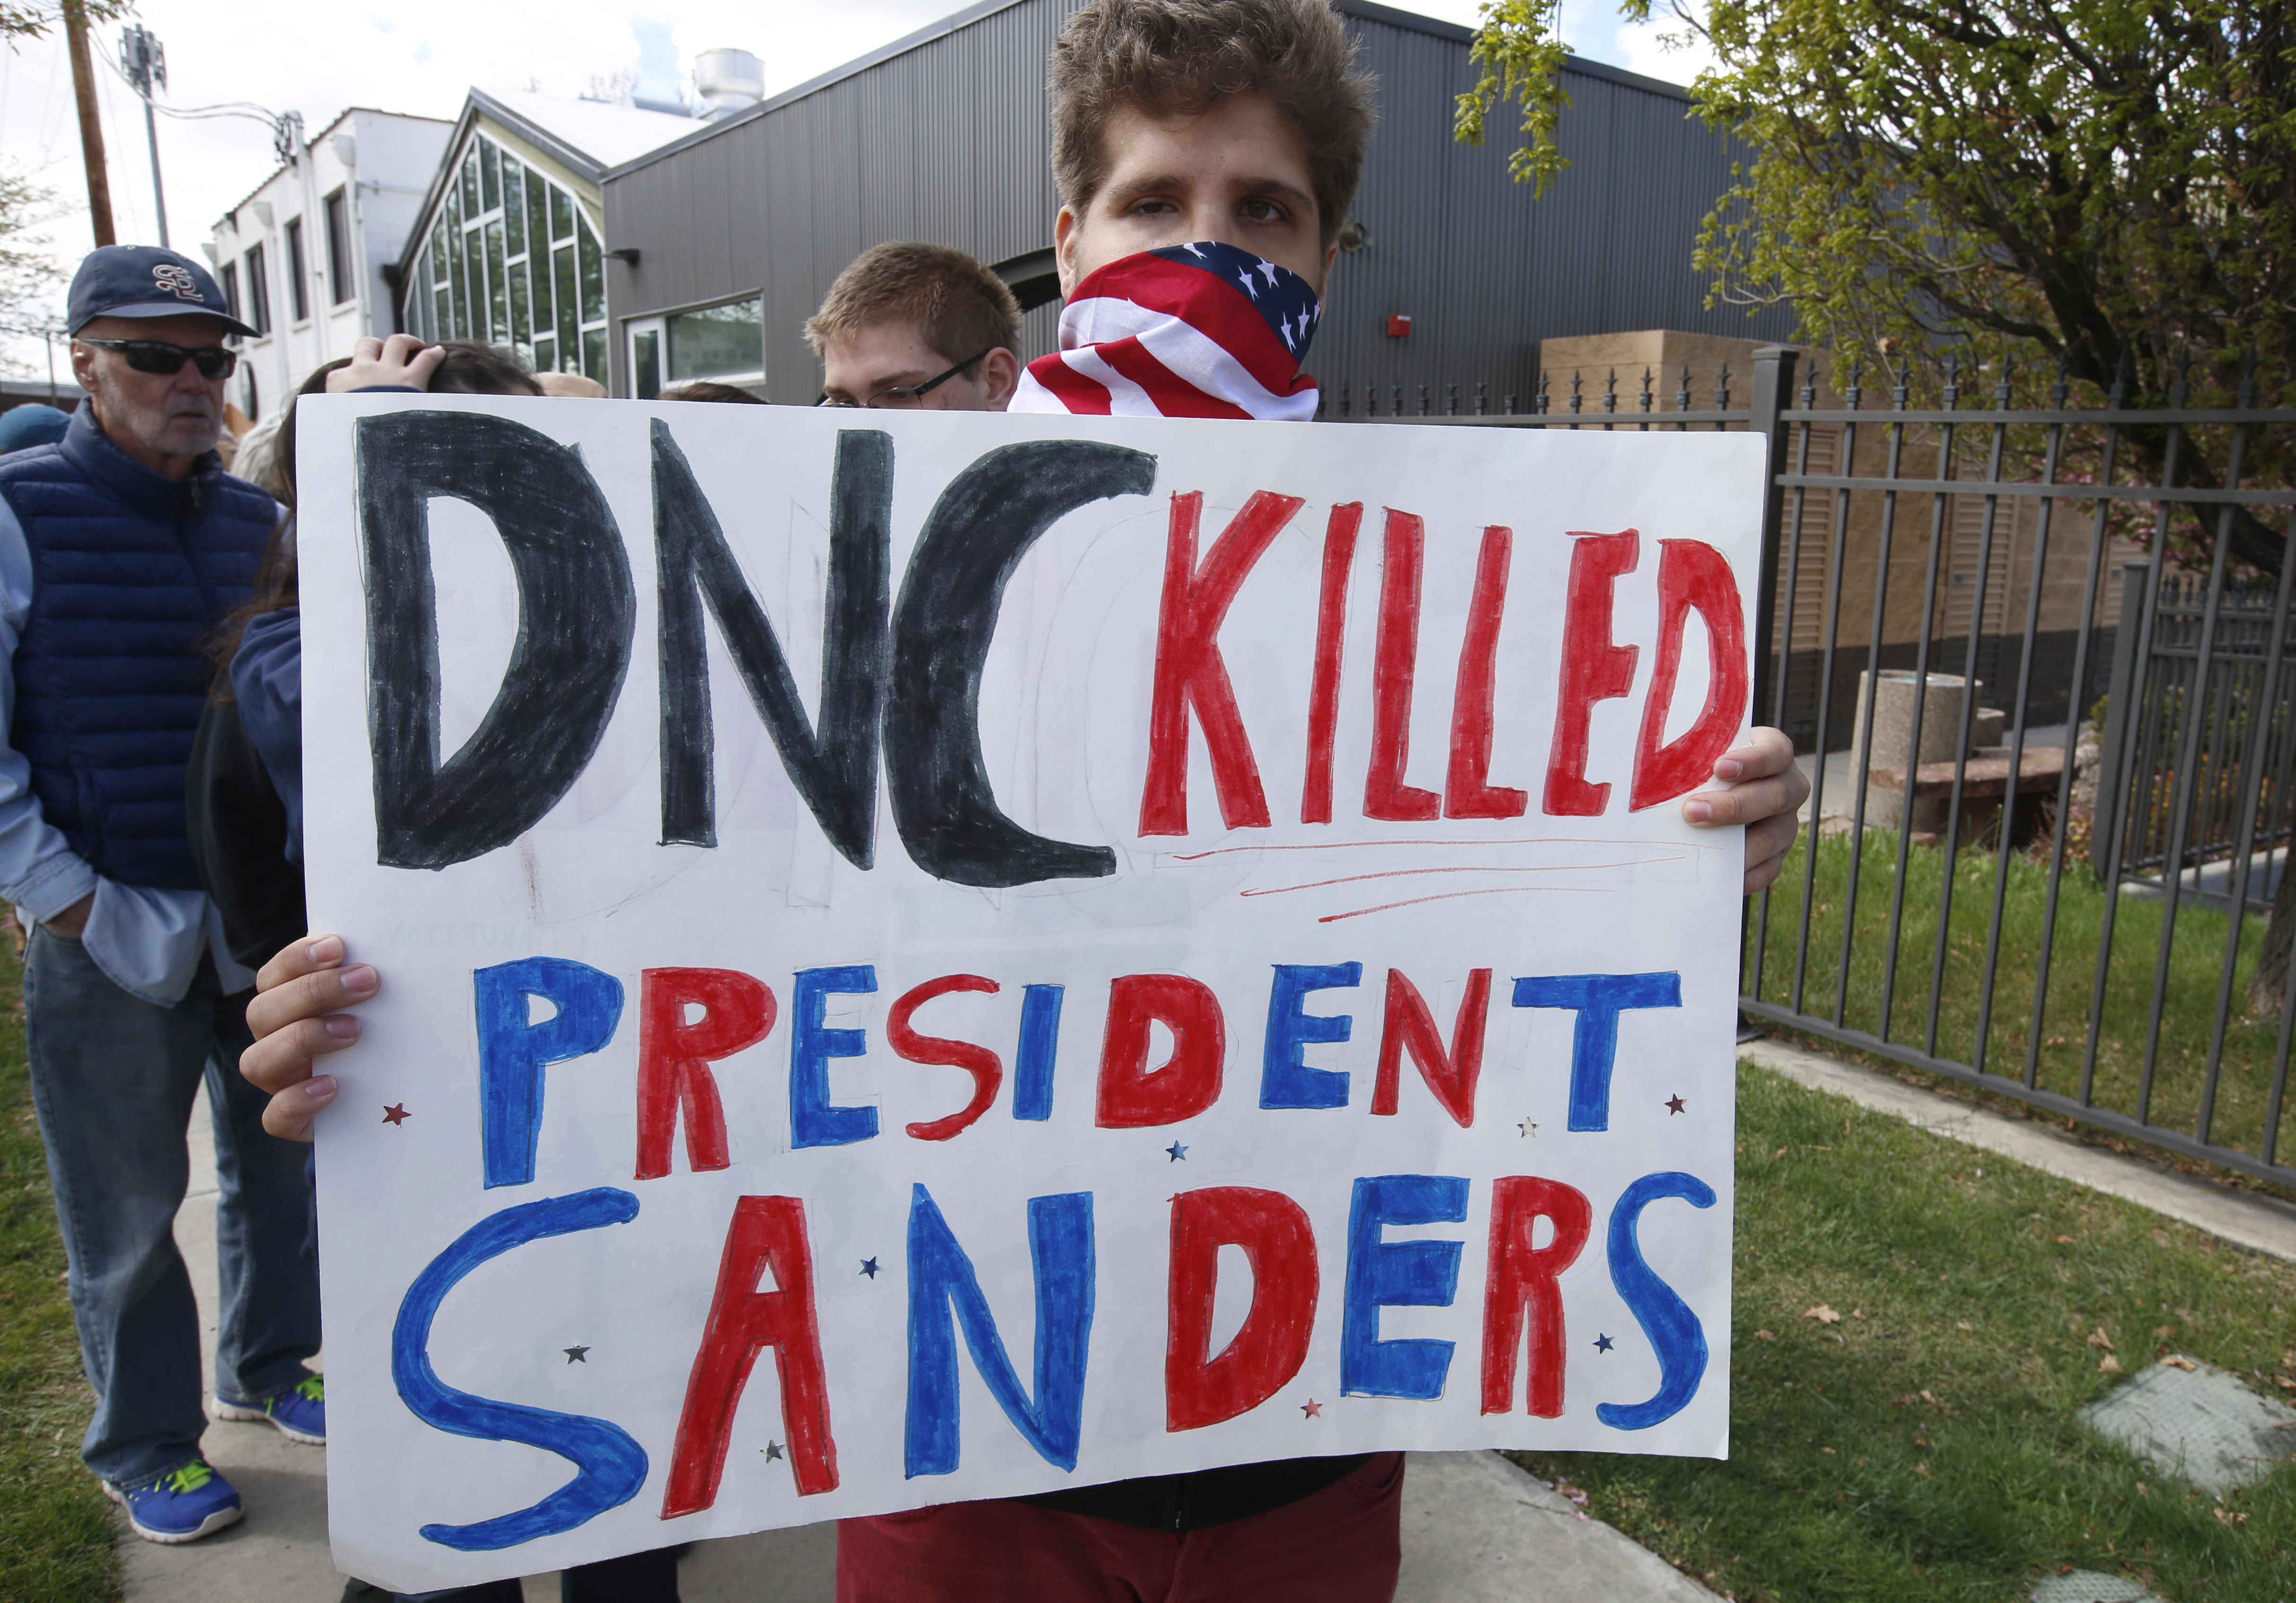 A man holds a sign reading “The DNC killed President Sanders” as he waits in line to enter aDemocratic unity rally with Bernie Sanders and DNC Chairman Tom Perez on April 21, 2017 in Salt Lake City, Utah.